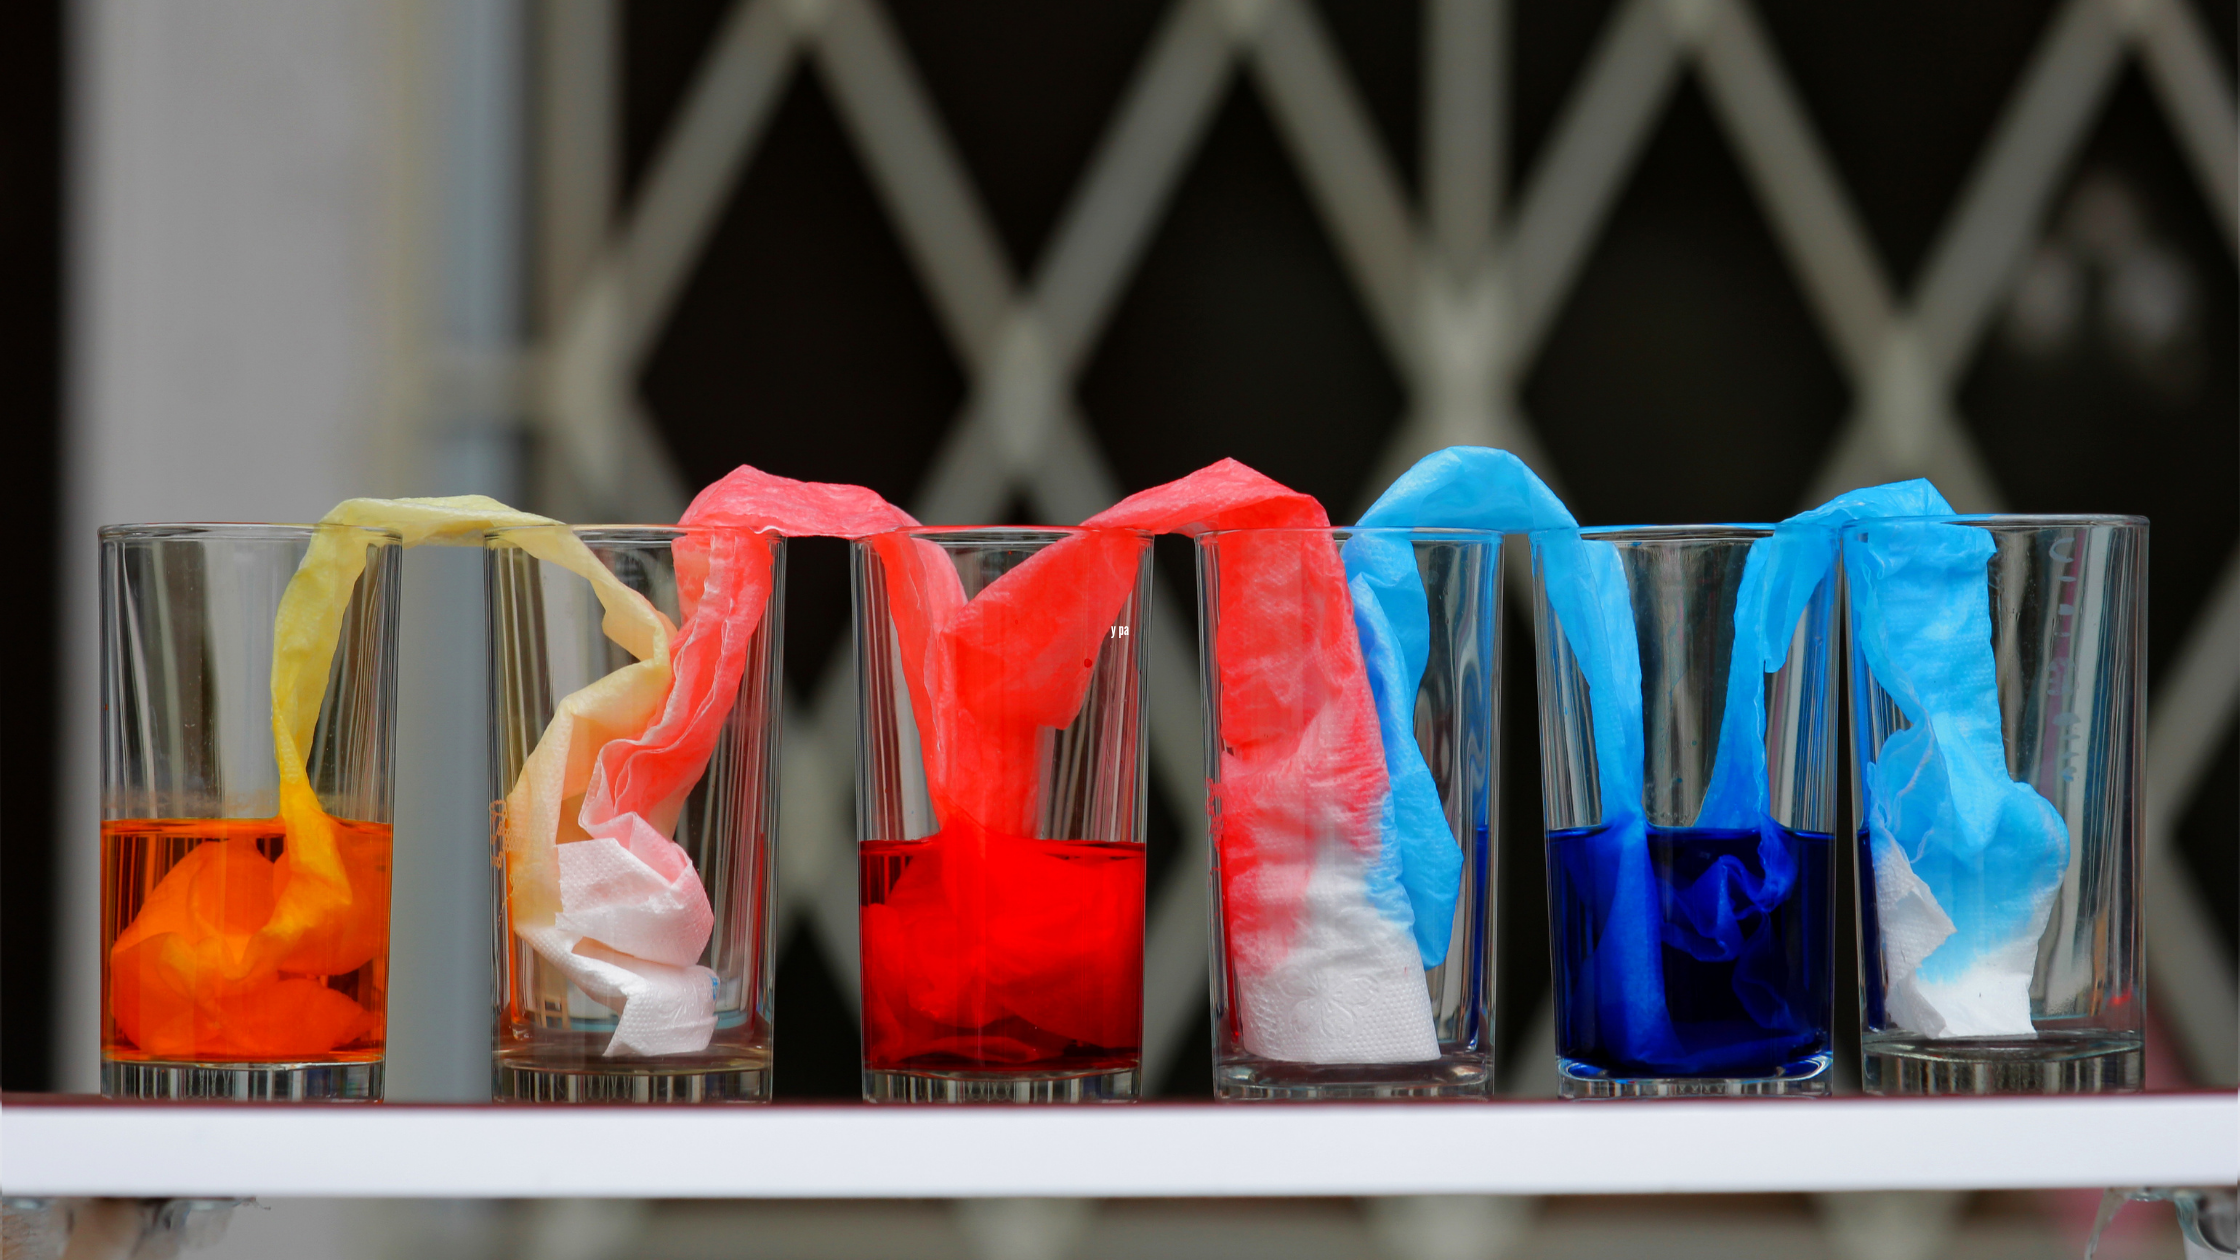 5 Fun & Cool Science Activities with Dye to Do With the Kids 4